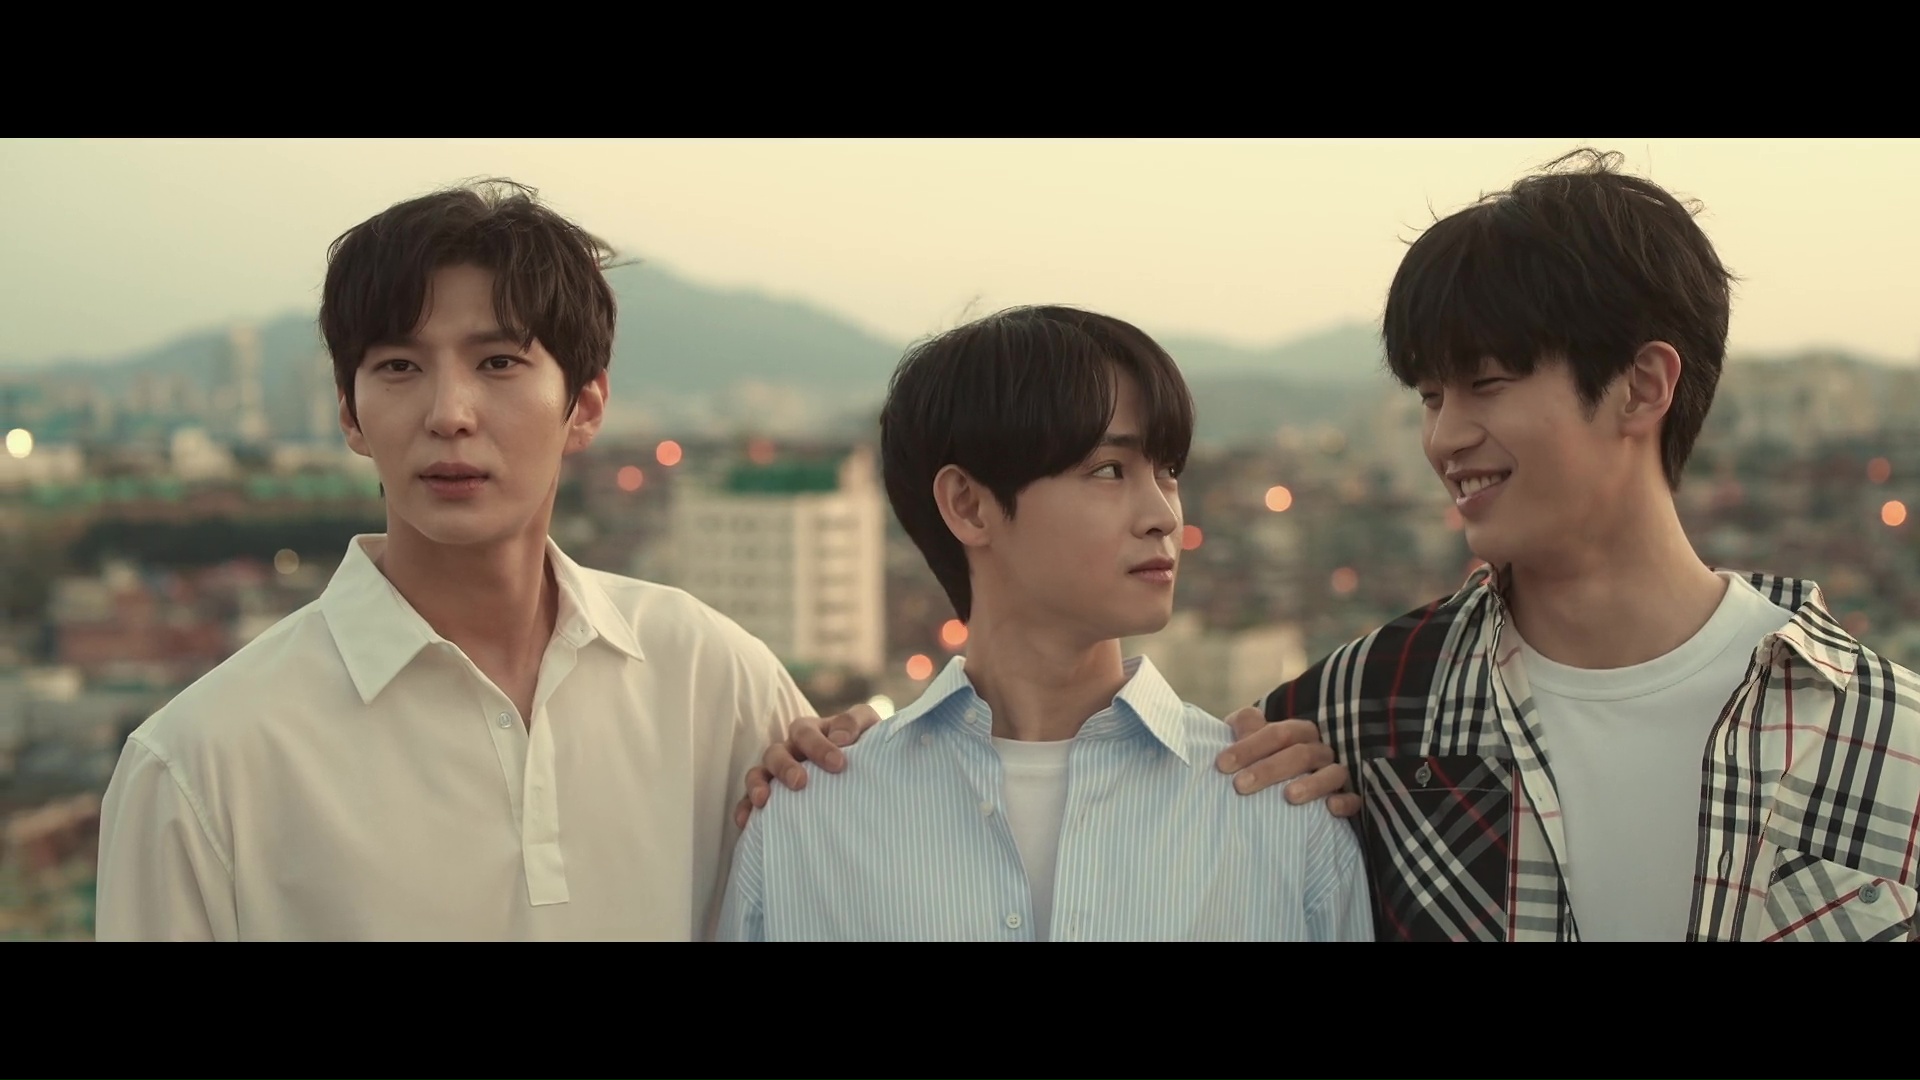 Good Ol’ Review: Good Things Not Enough to Make Up for Shortcomings of “Happy Ending Romance”